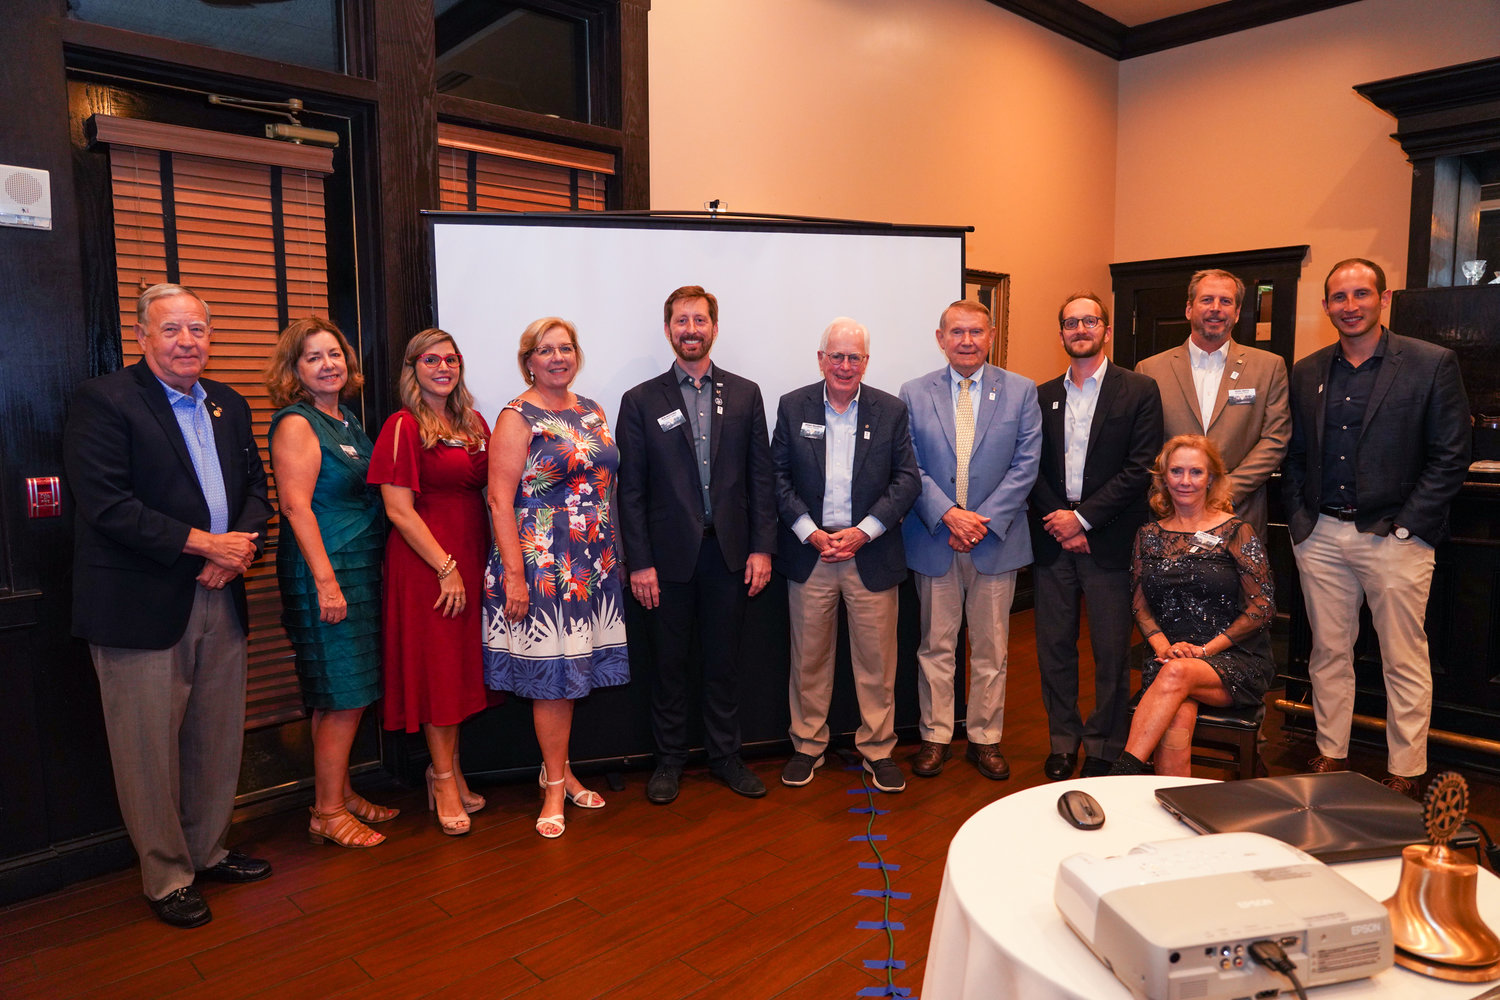 The Rotary Club of Ponte Vedra’s new board of directors.